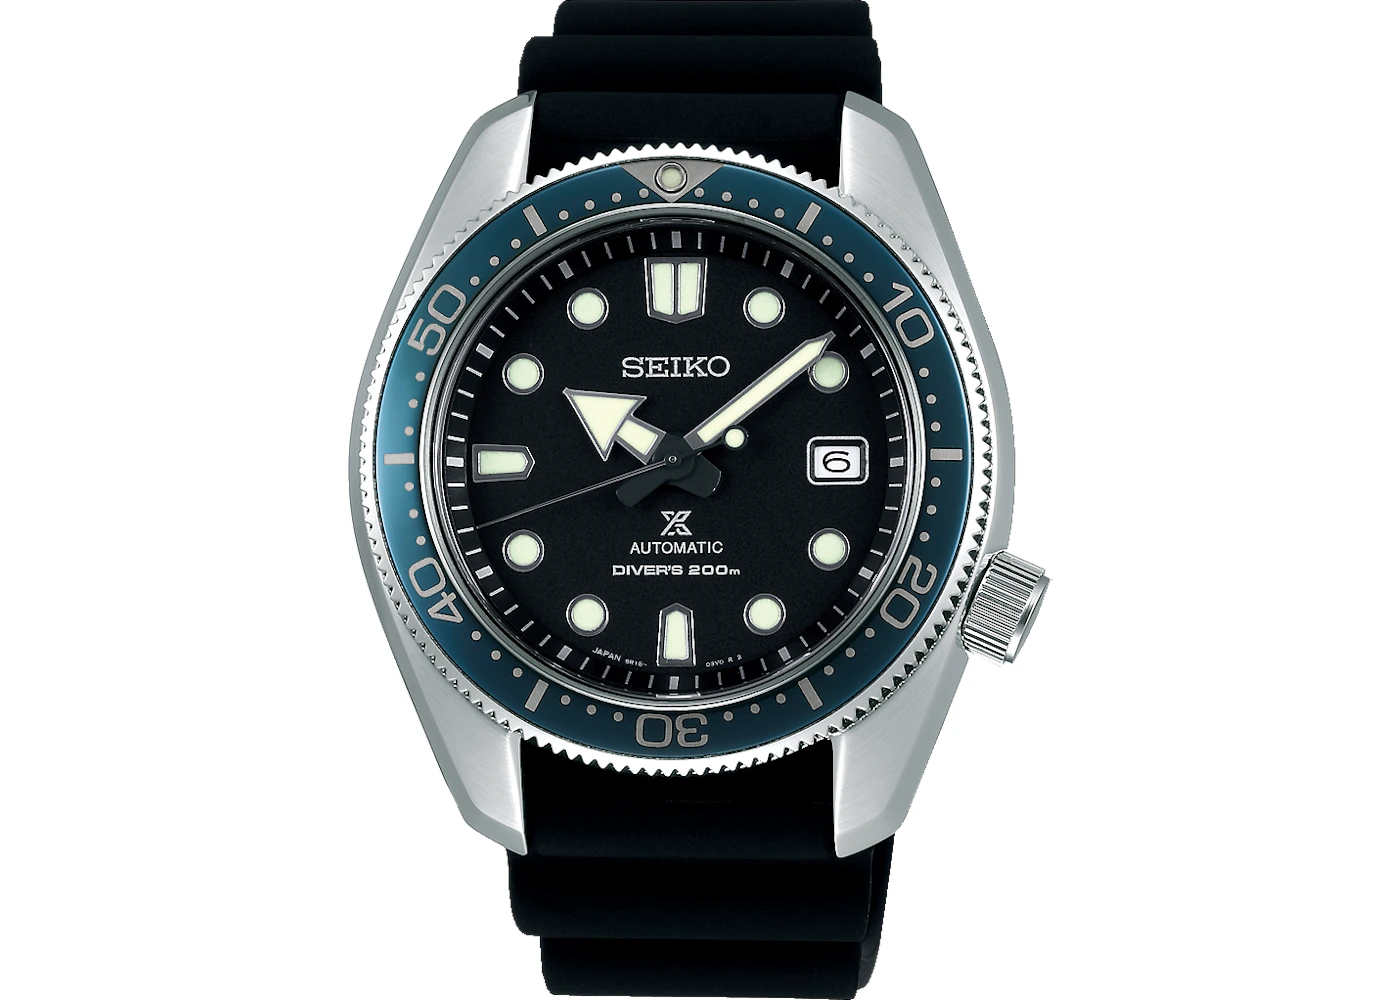 Seiko Prospex SBDC063 - 44mm in Stainless Steel - US